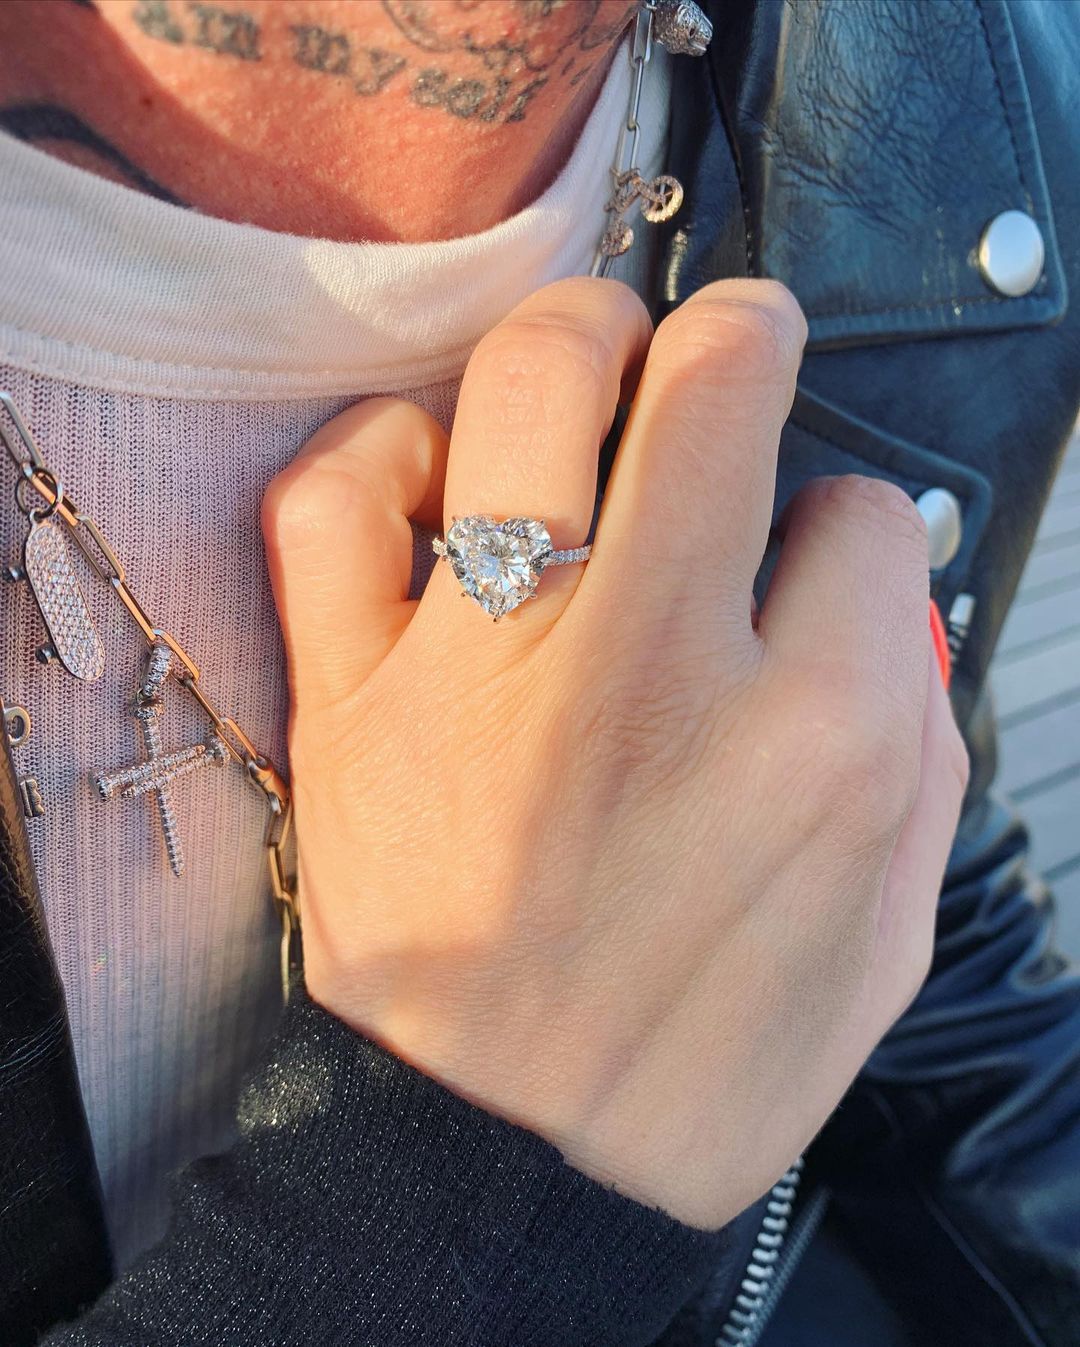 Avril Lavigne shows off her heart-shaped diamond engagement ring.